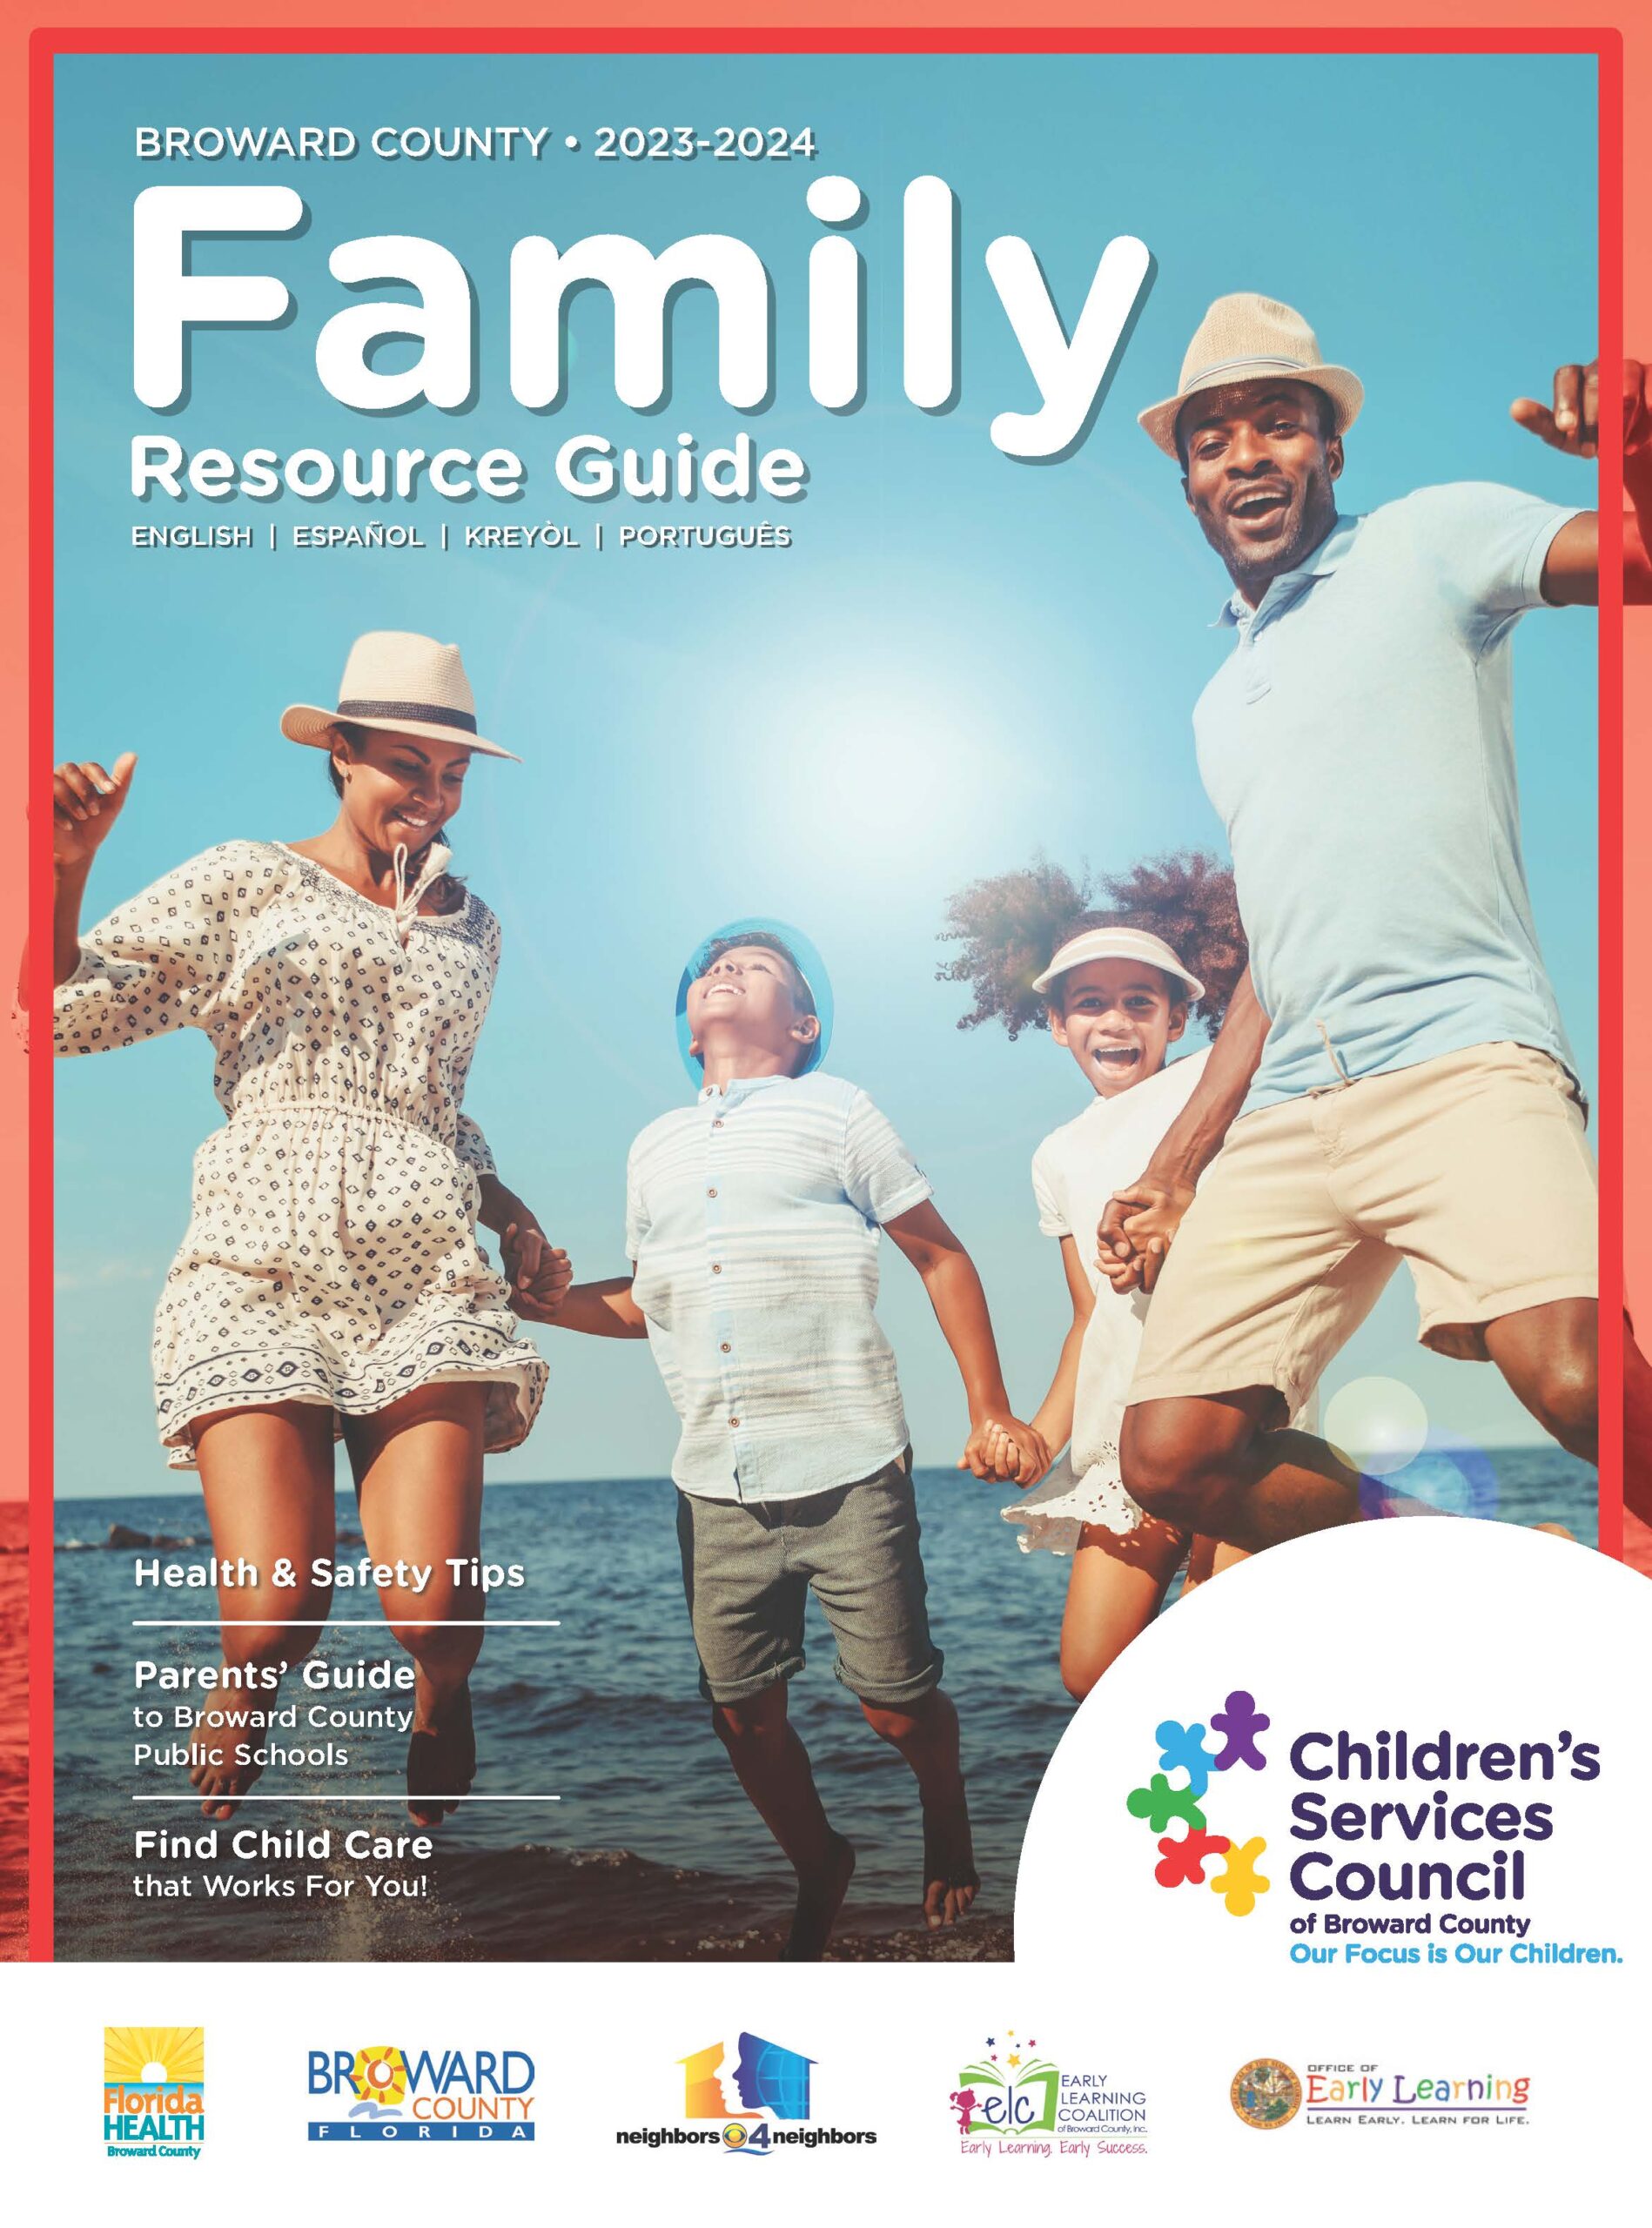 Family Resource Guide image